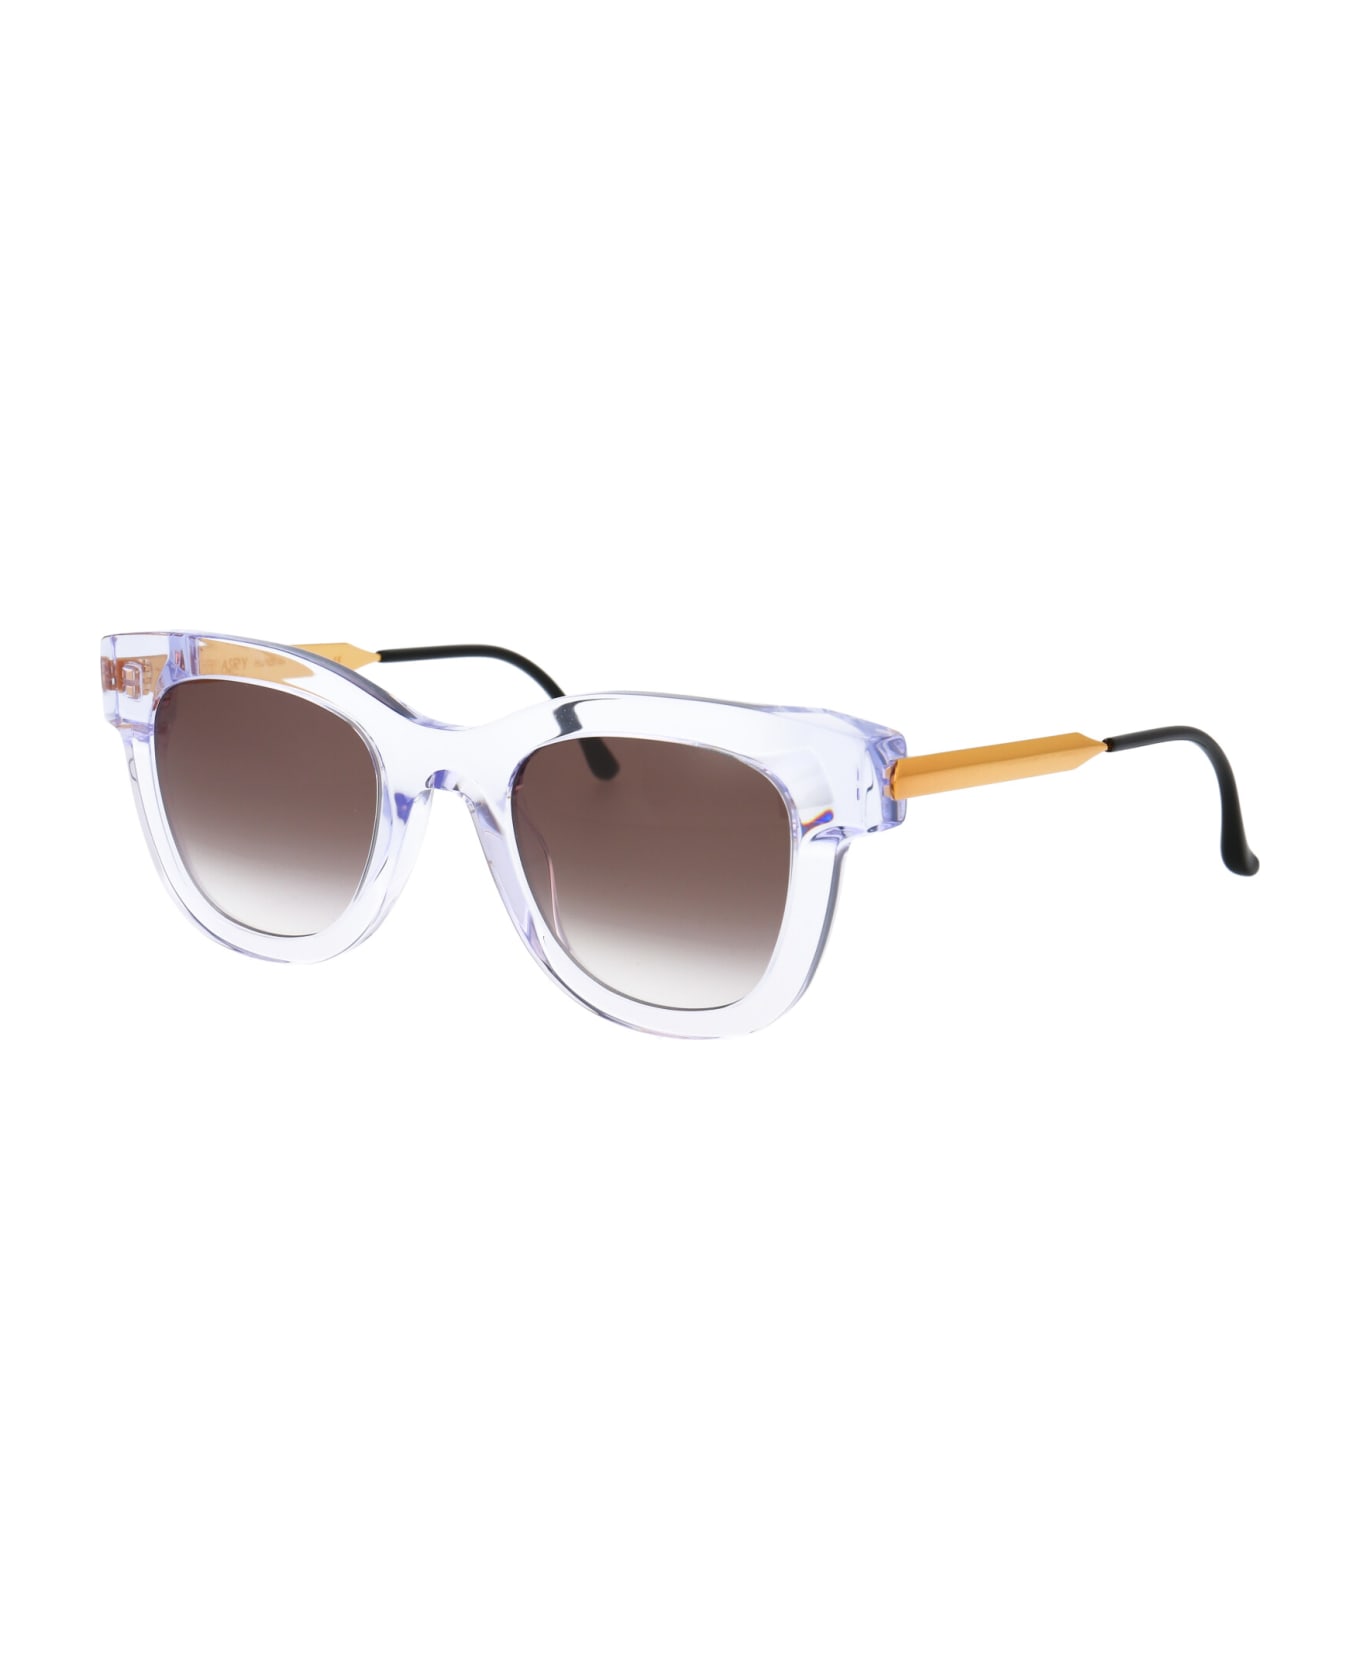 Thierry Lasry Sexxxy Sunglasses - 00 CRYSTAL サングラス